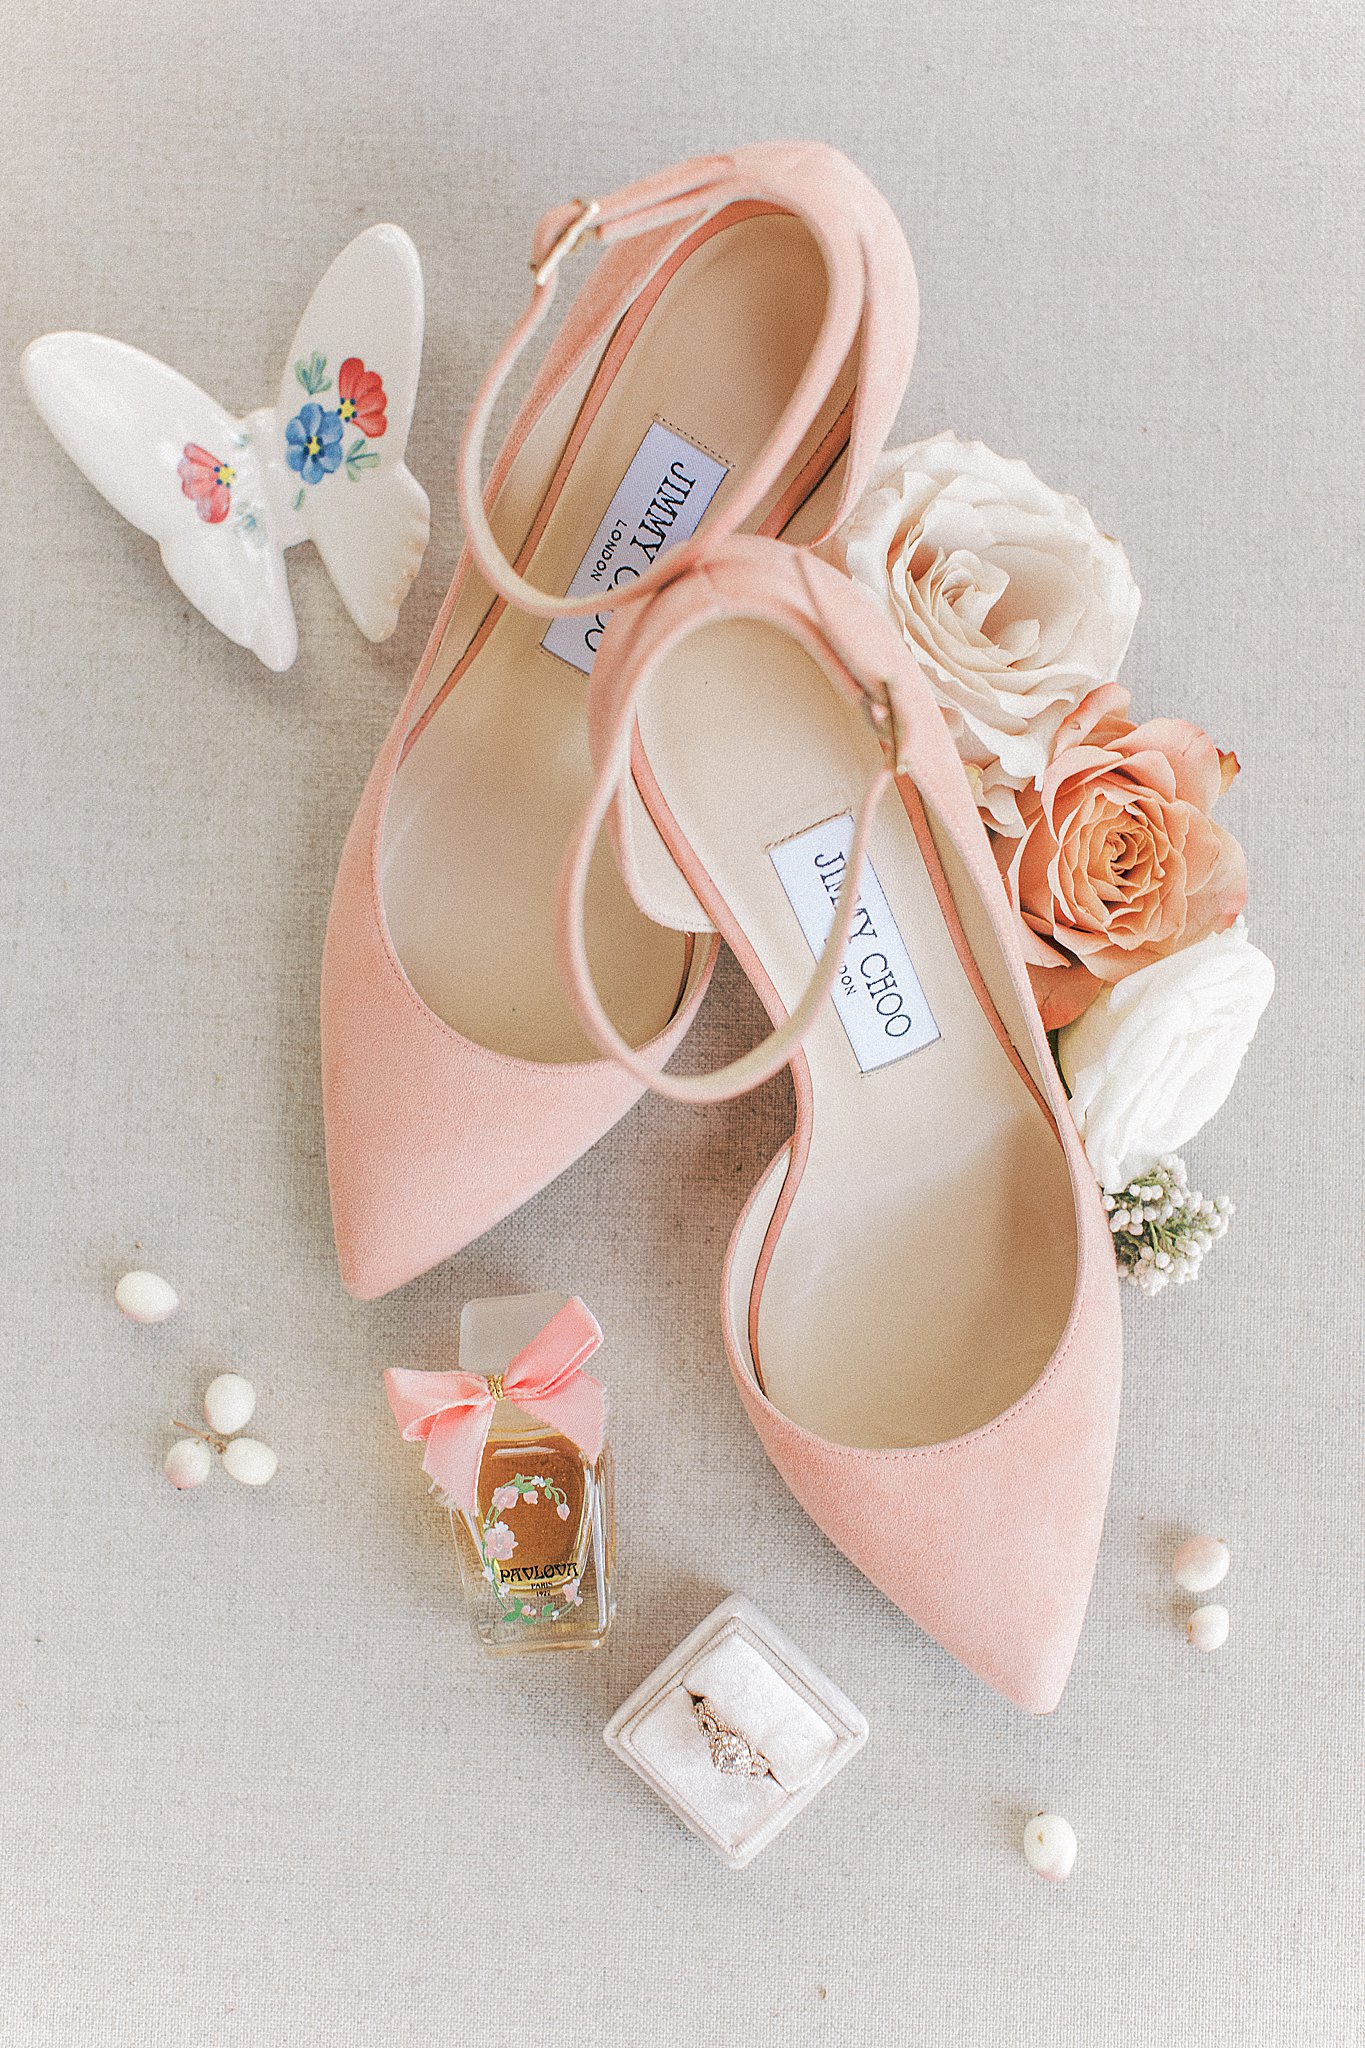 blush pink Jimmy Choo's, unique Wedding ring and bridal details captured by Anna Kay Photography